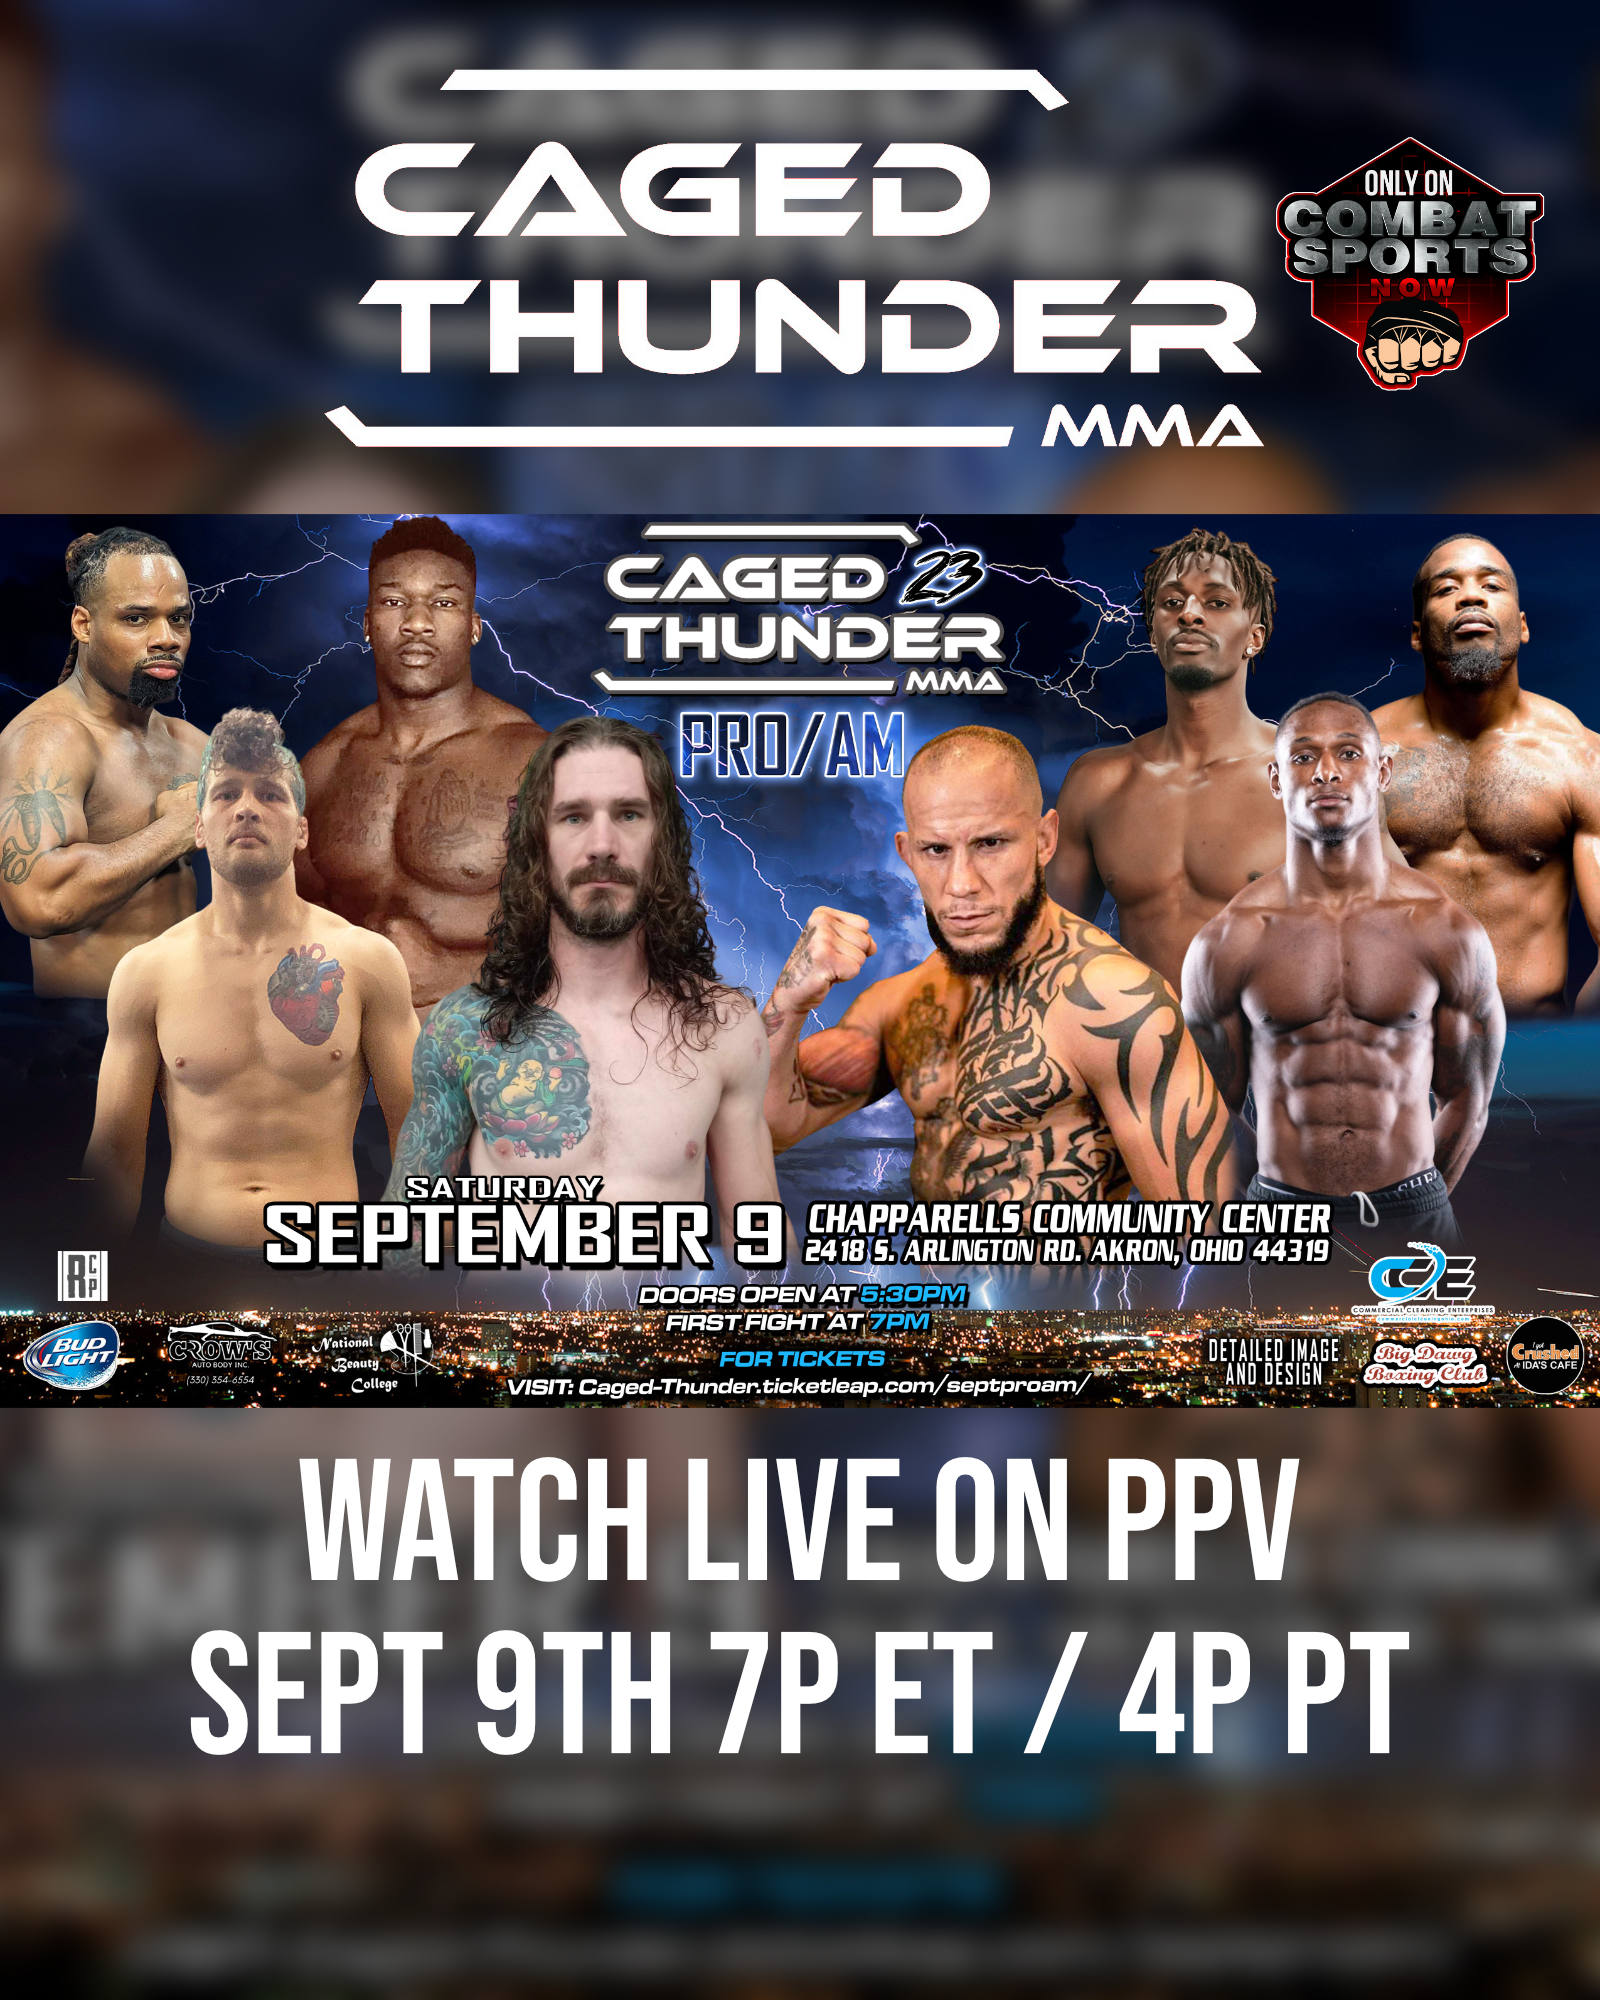 Caged Thunder 23 Live on Combat Sports Now